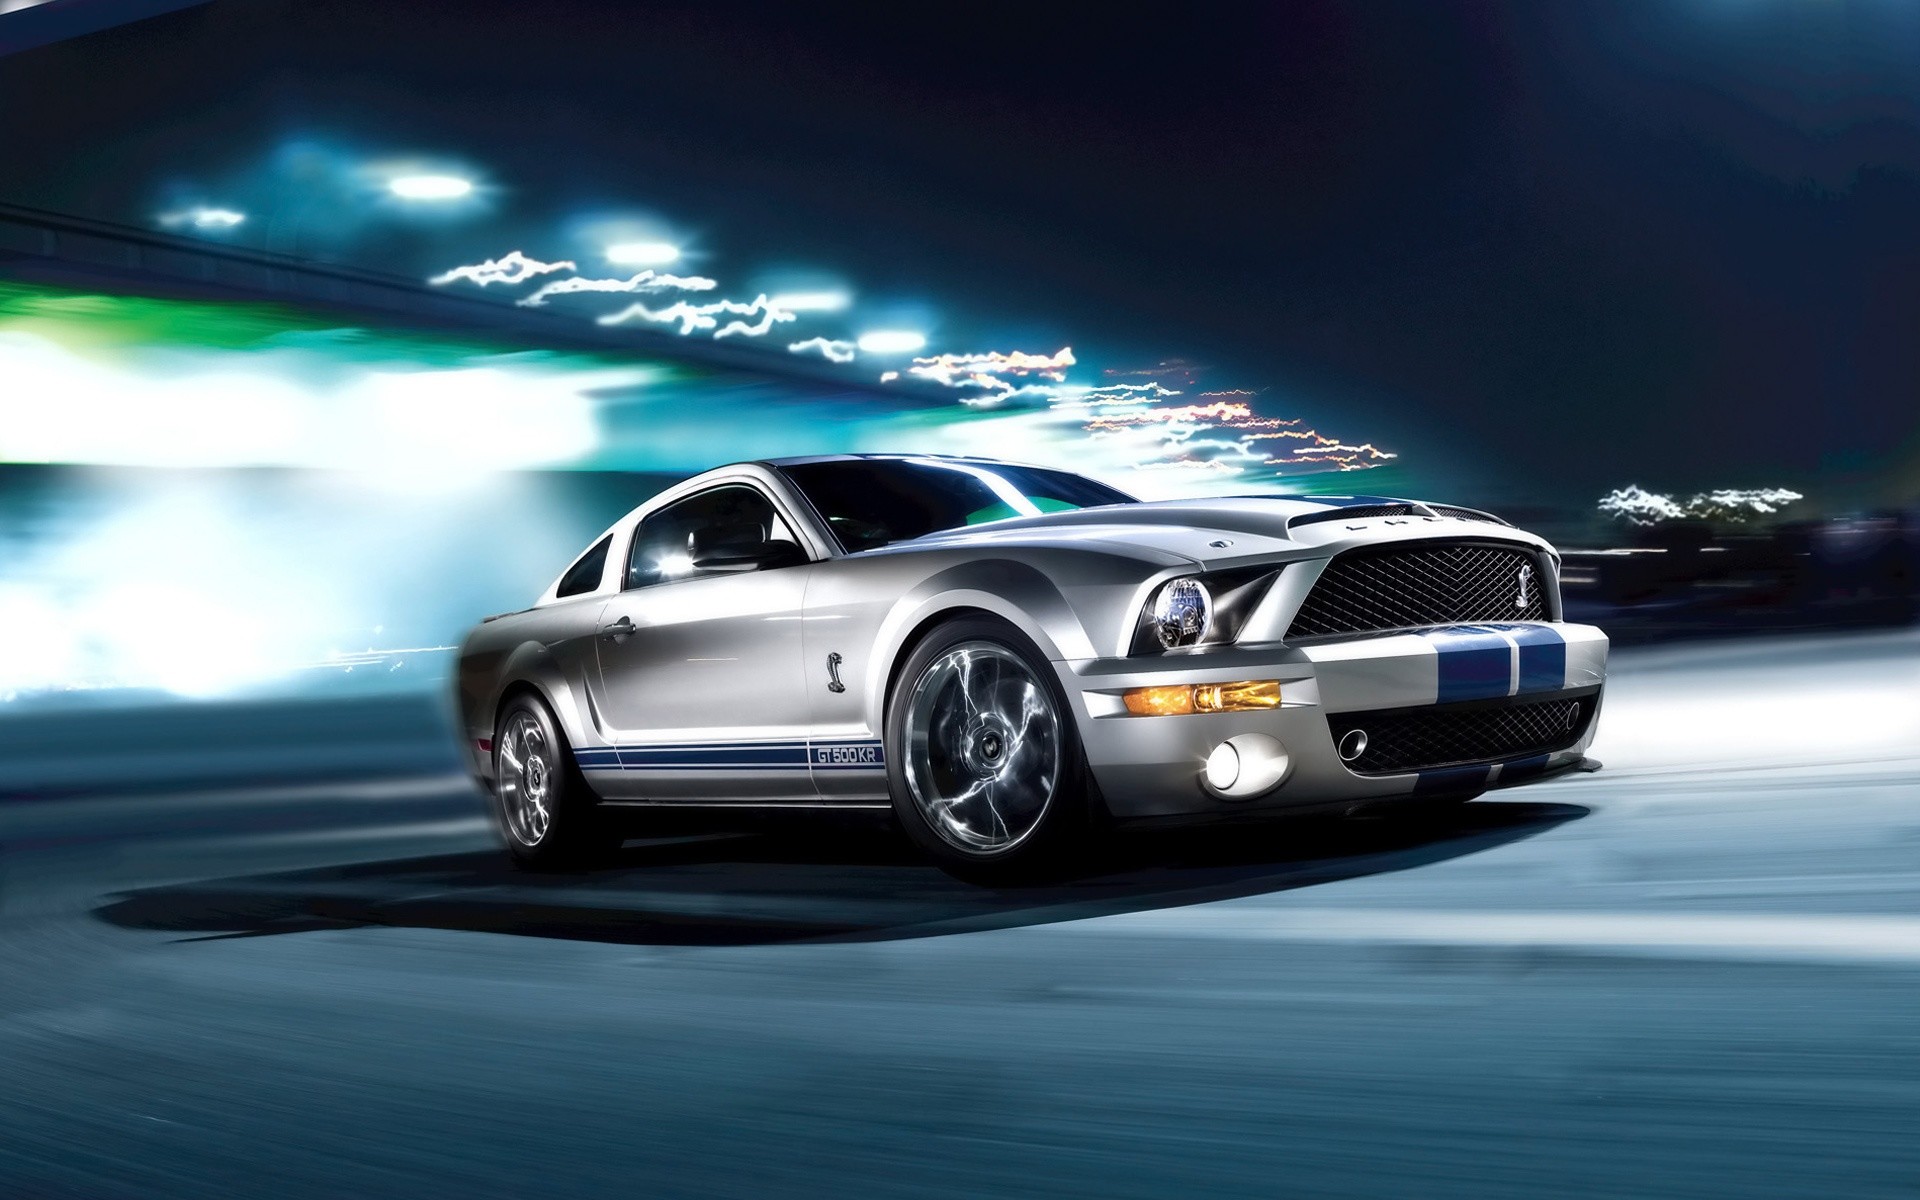 75 Ford Mustang Shelby GT500 HD Wallpapers | Backgrounds – Wallpaper Abyss